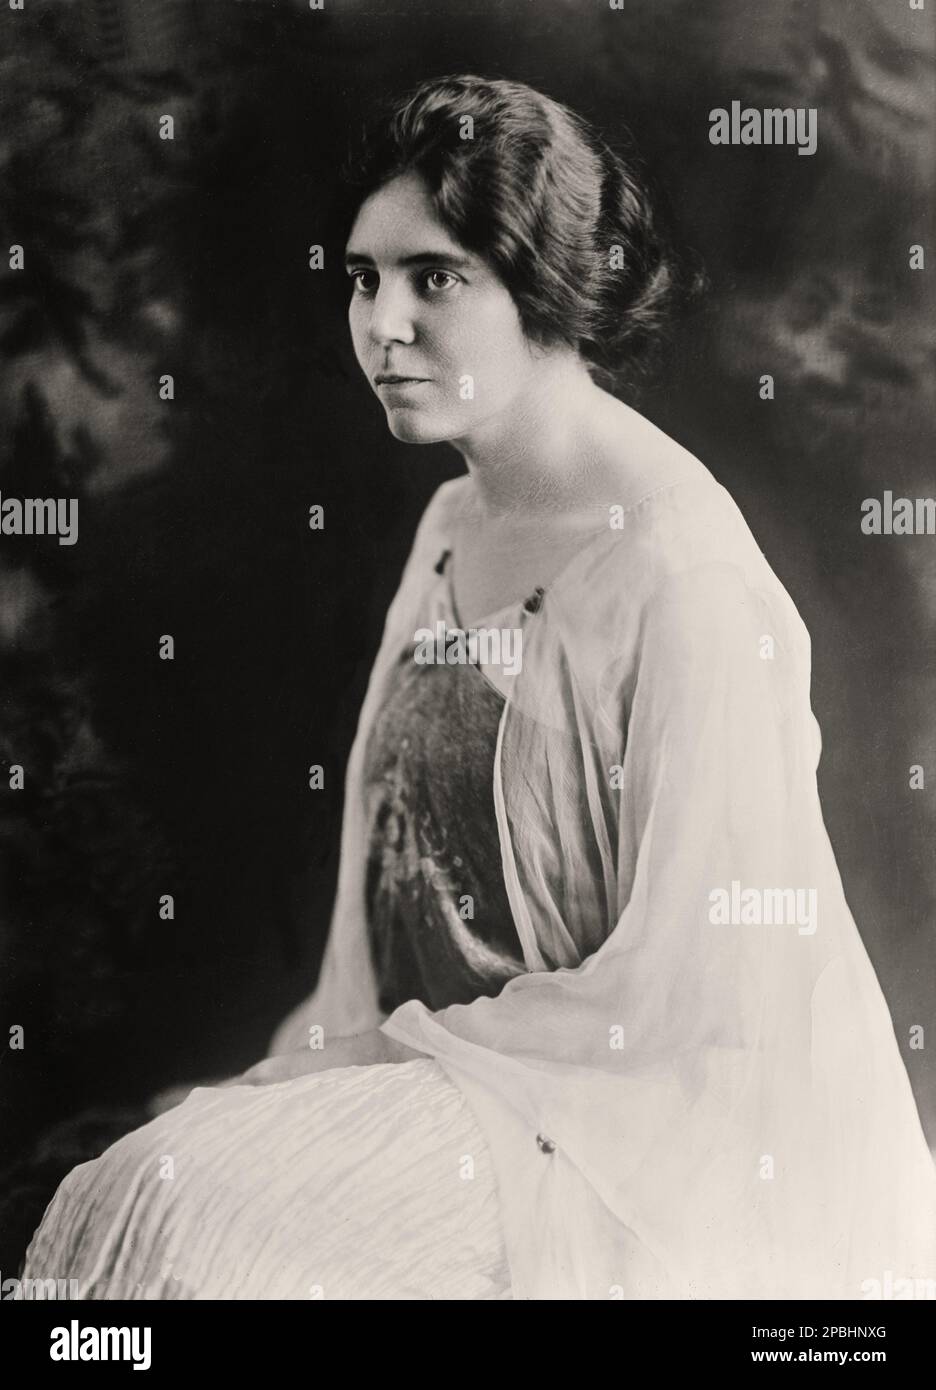 1925 , Washington , USA :  The suffragist ALICE Stokes  PAUL ( 1885 – 1977 ) was an American suffragist leader. Along with Lucy Burns (a close friend) and others, she led a successful campaign for women's suffrage that resulted in the passage of the Nineteenth Amendment to the U.S. Constitution in 1920. - SUFFRAGETTA - sufraggetta - Sufragist - POLITICO - POLITICIAN - POLITICA - POLITIC - FEMMINISMO - FEMMINISTA  - FEMMINISTE - SUFFRAGETTE - USA - ritratto - portrait  - FEMMINISM - FEMMINIST - SUFFRAGIO UNIVERSALE - VOTO POLITICO ALLE DONNE - chignon   ----  Archivio GBB Stock Photo